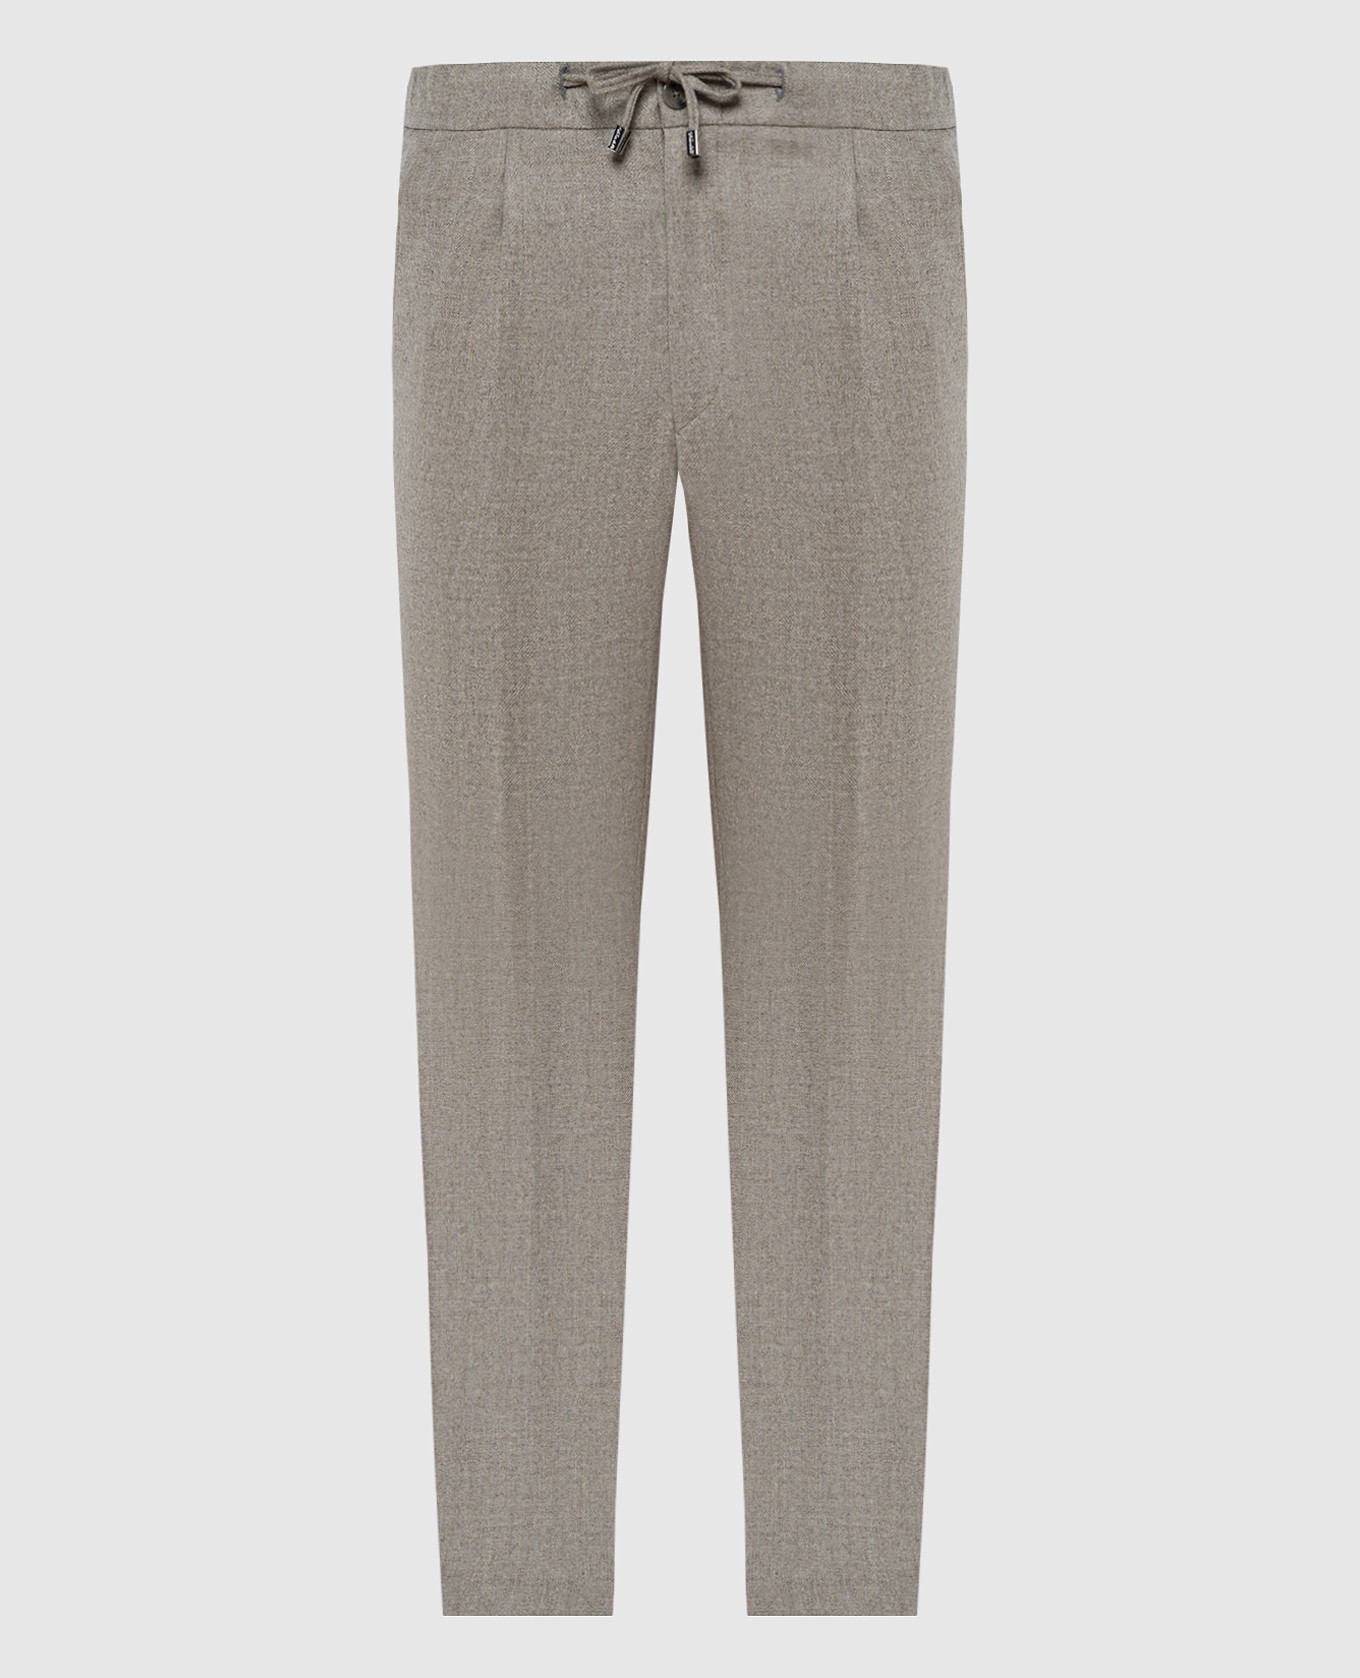 Brown wool and cashmere pants